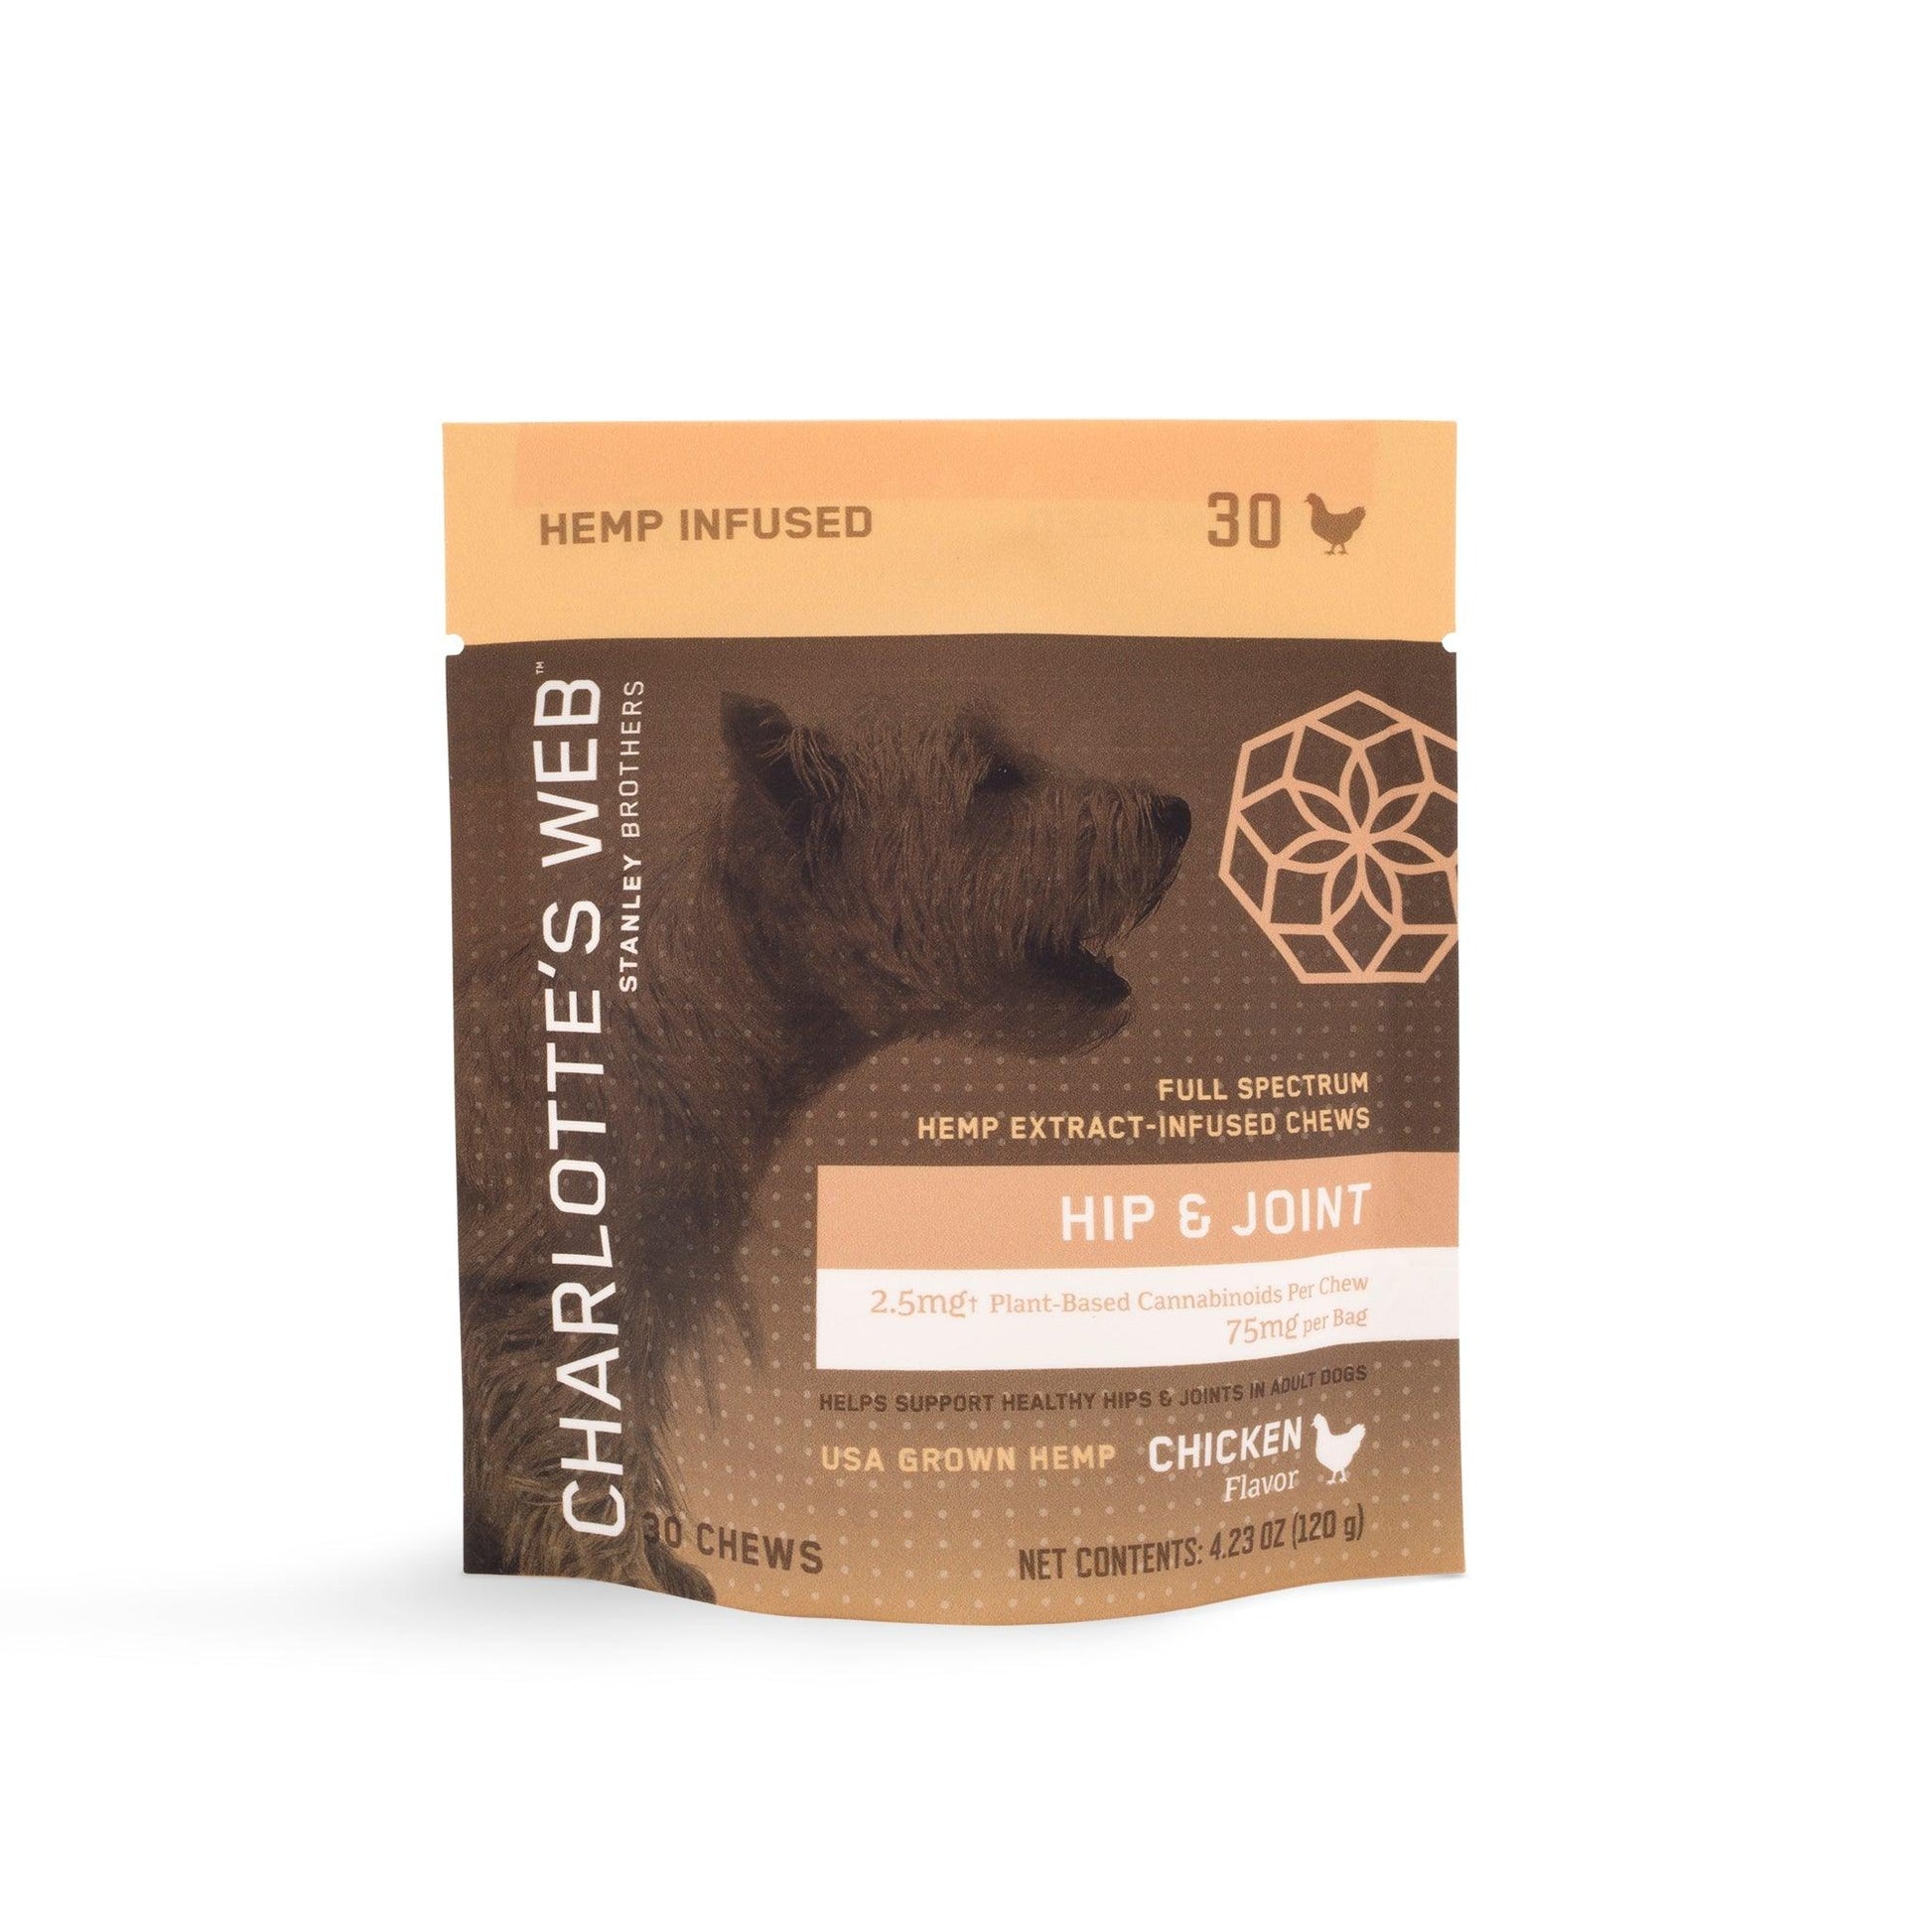 Charlotte's Web CBD hip and joint 30 chews for dogs